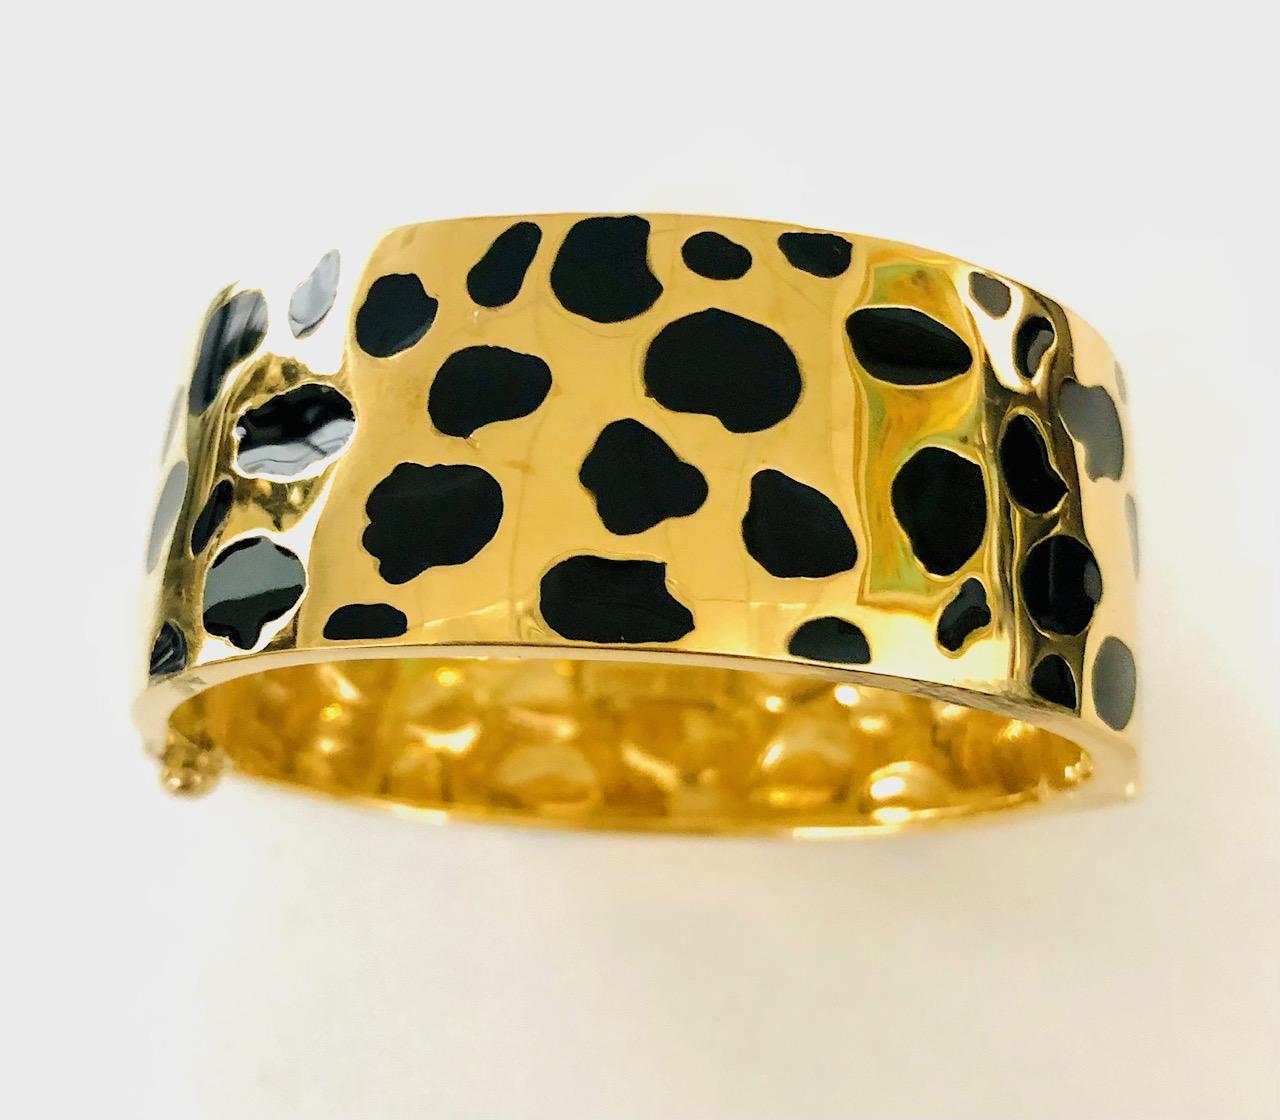 Our very fashionable Bangle Bracelet is ready to be worn together with today's 